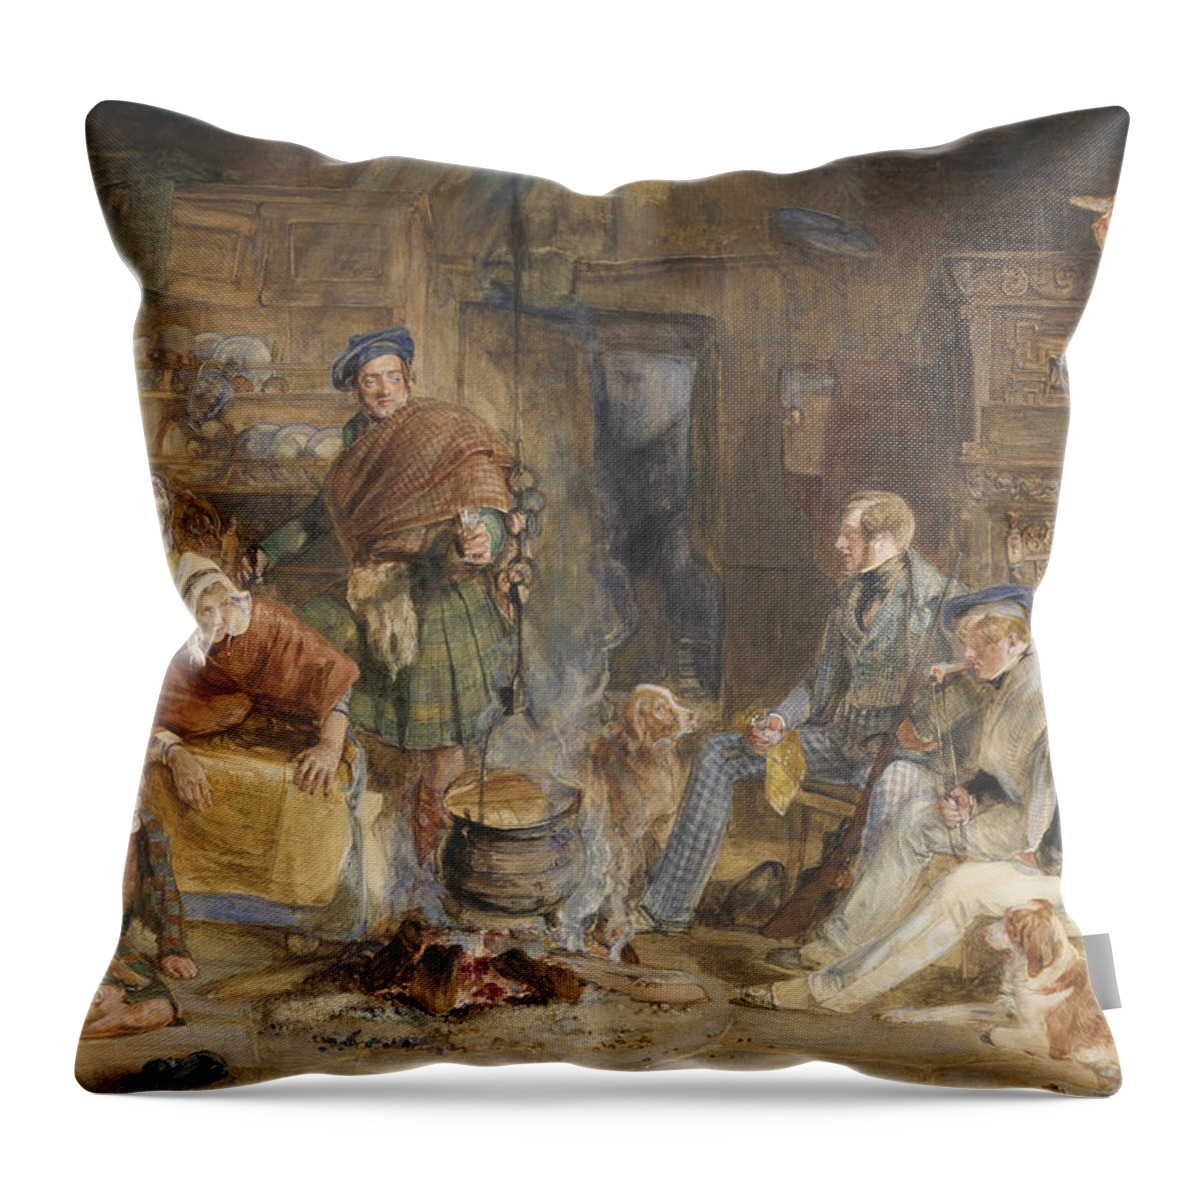 19th Century Art Throw Pillow featuring the drawing Highland Hospitality by John Frederick Lewis